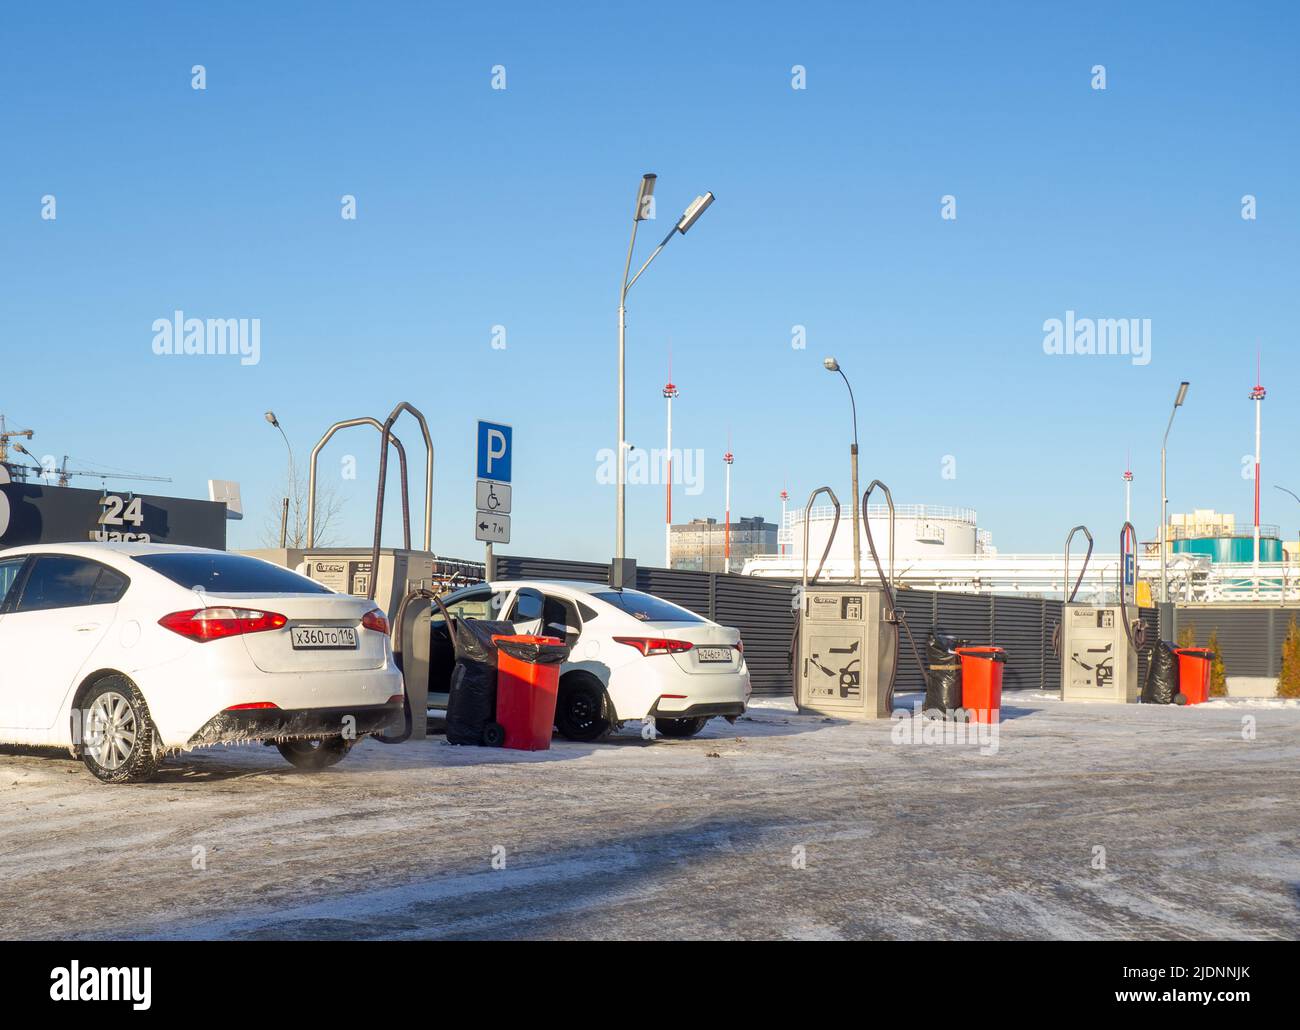 Car at the gas station. Refueling. Car enthusiasts. Life in the city Stock Photo